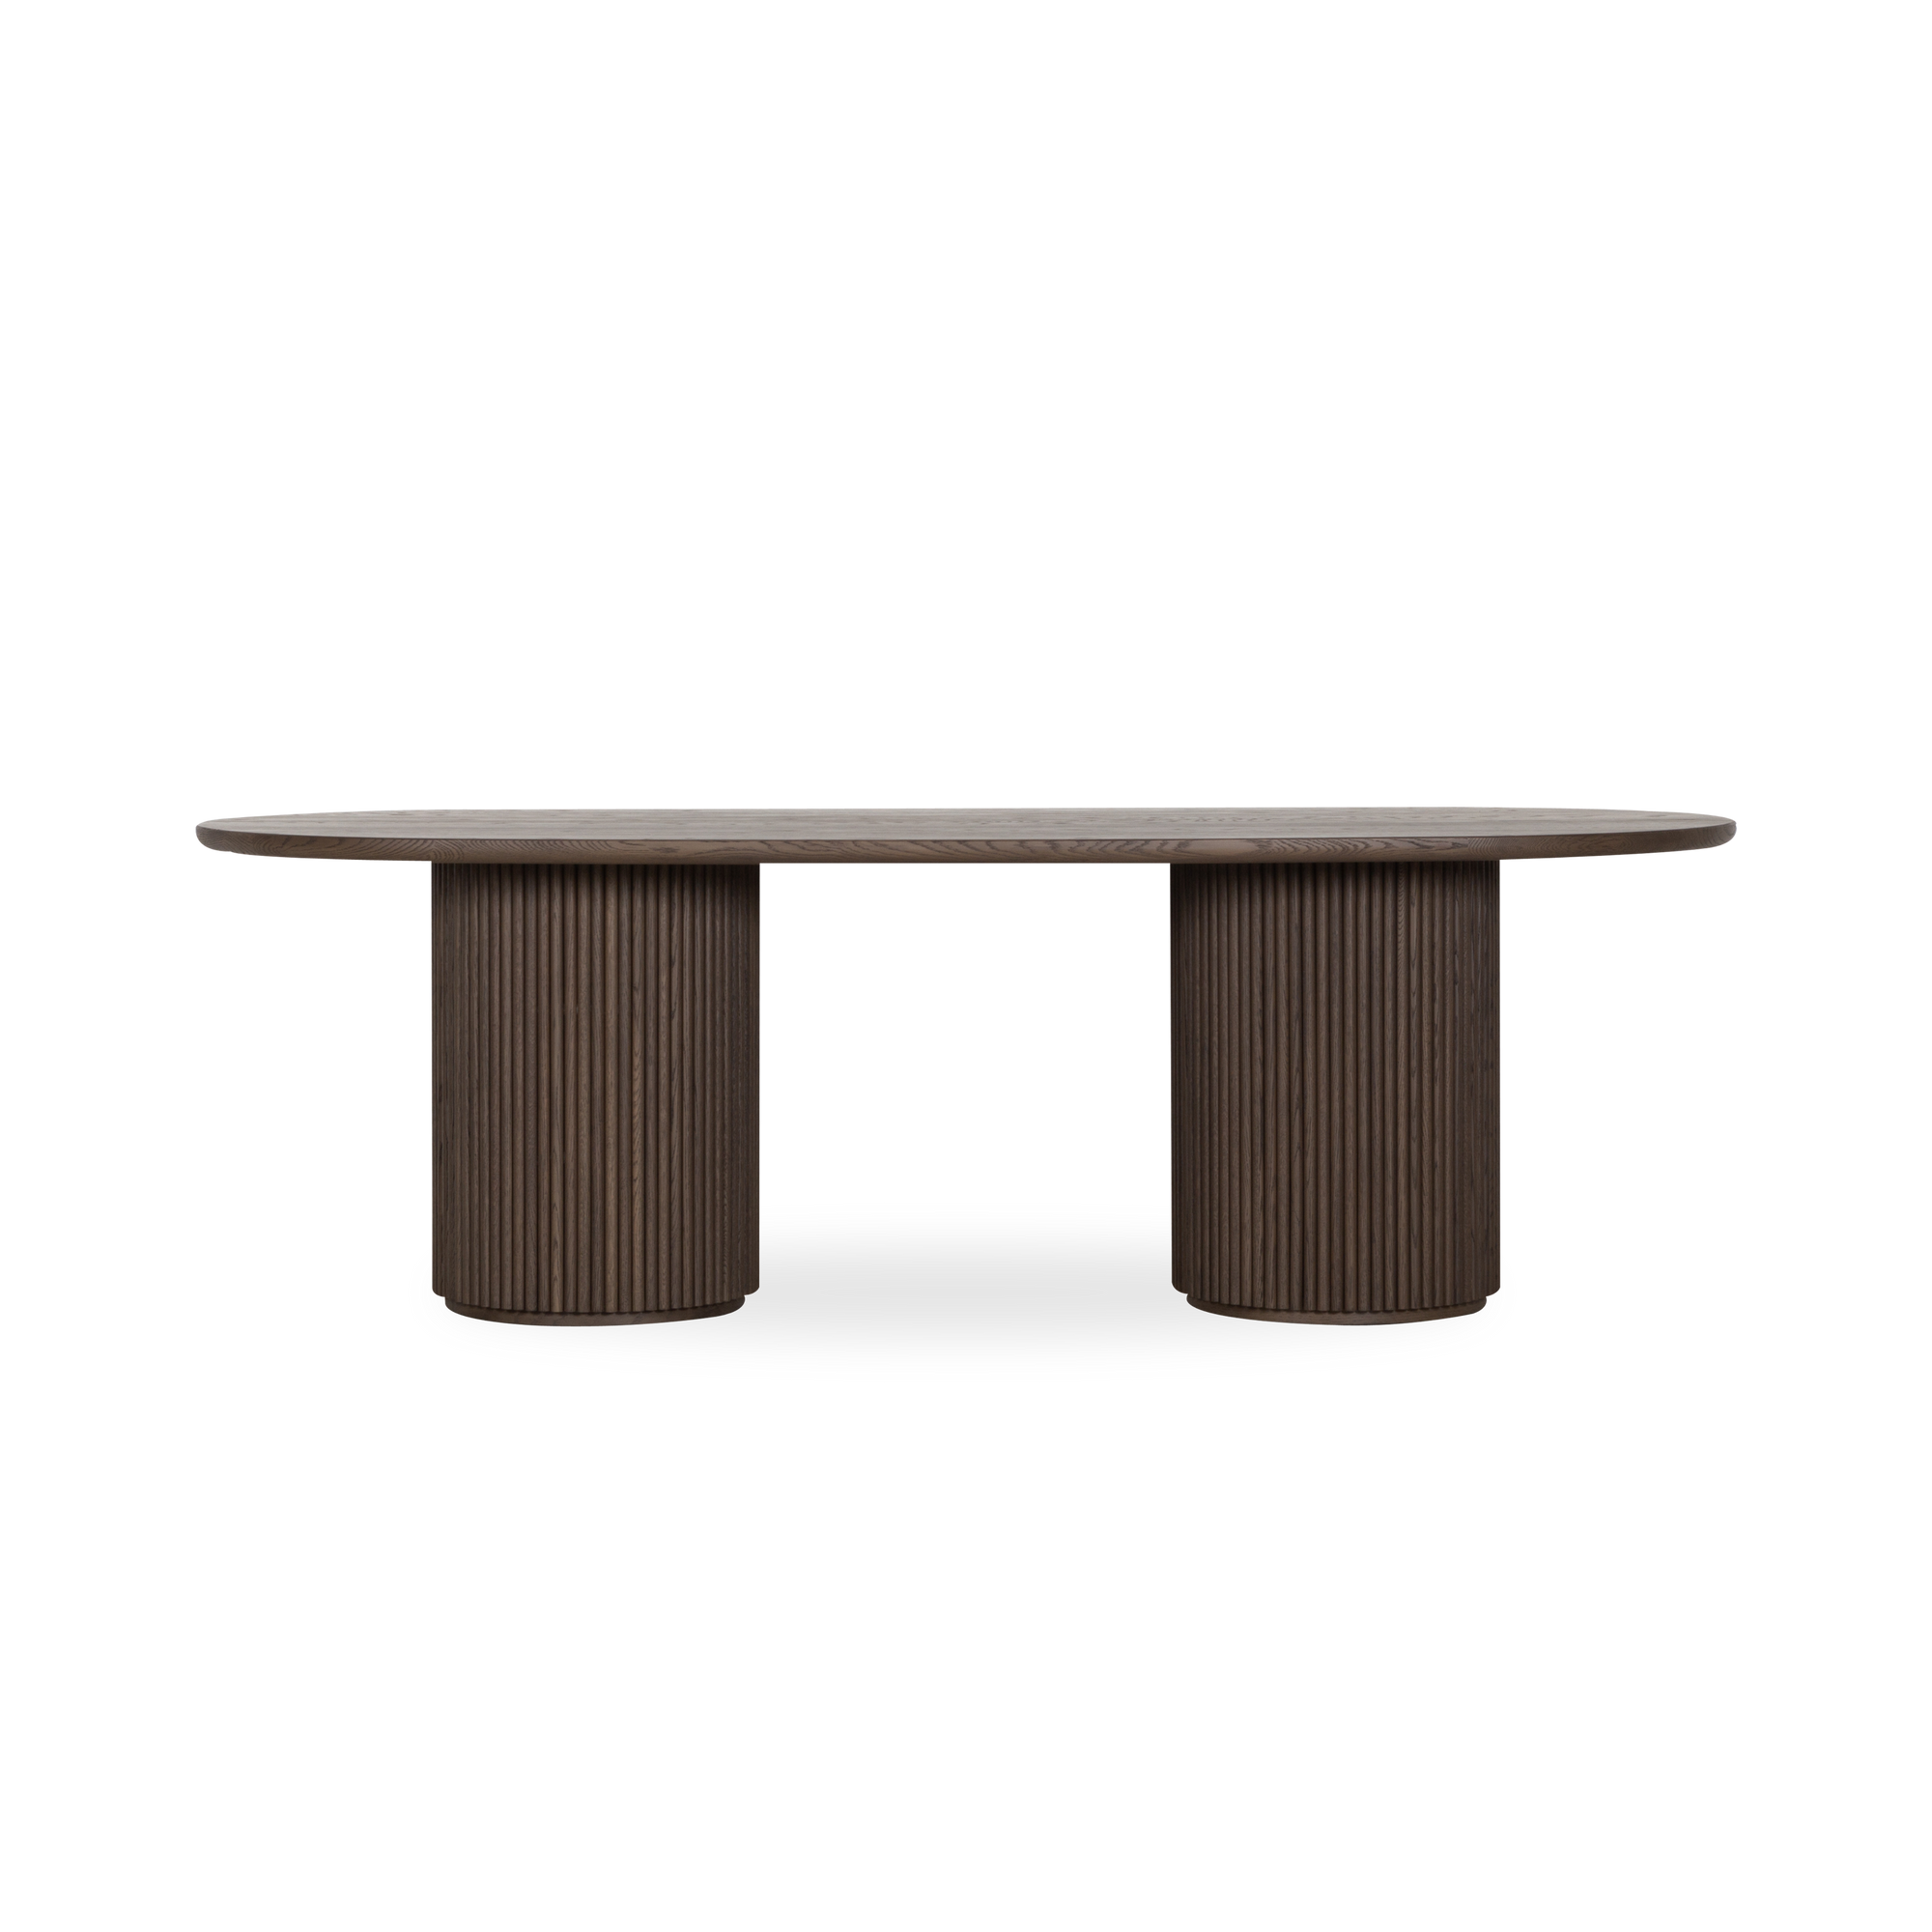 A captivating organic statement, the Laurel Oval Dining Table brings a classical feel to contemporary styling.